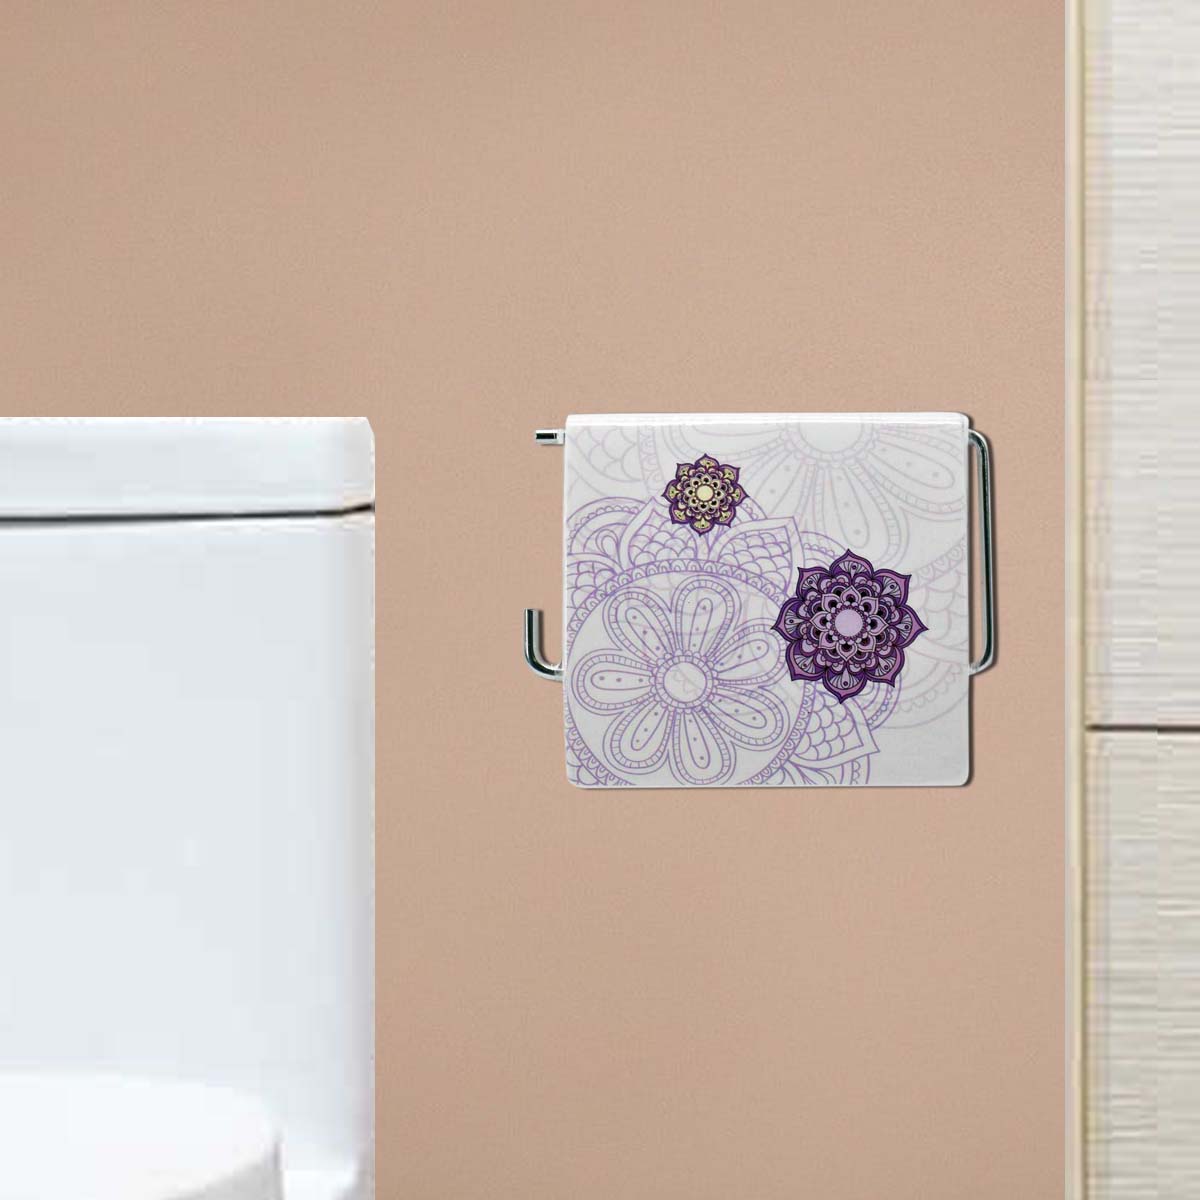 Wall Mounted Acrylic Tissue Paper, Toilet Roll Holder (JS160808)